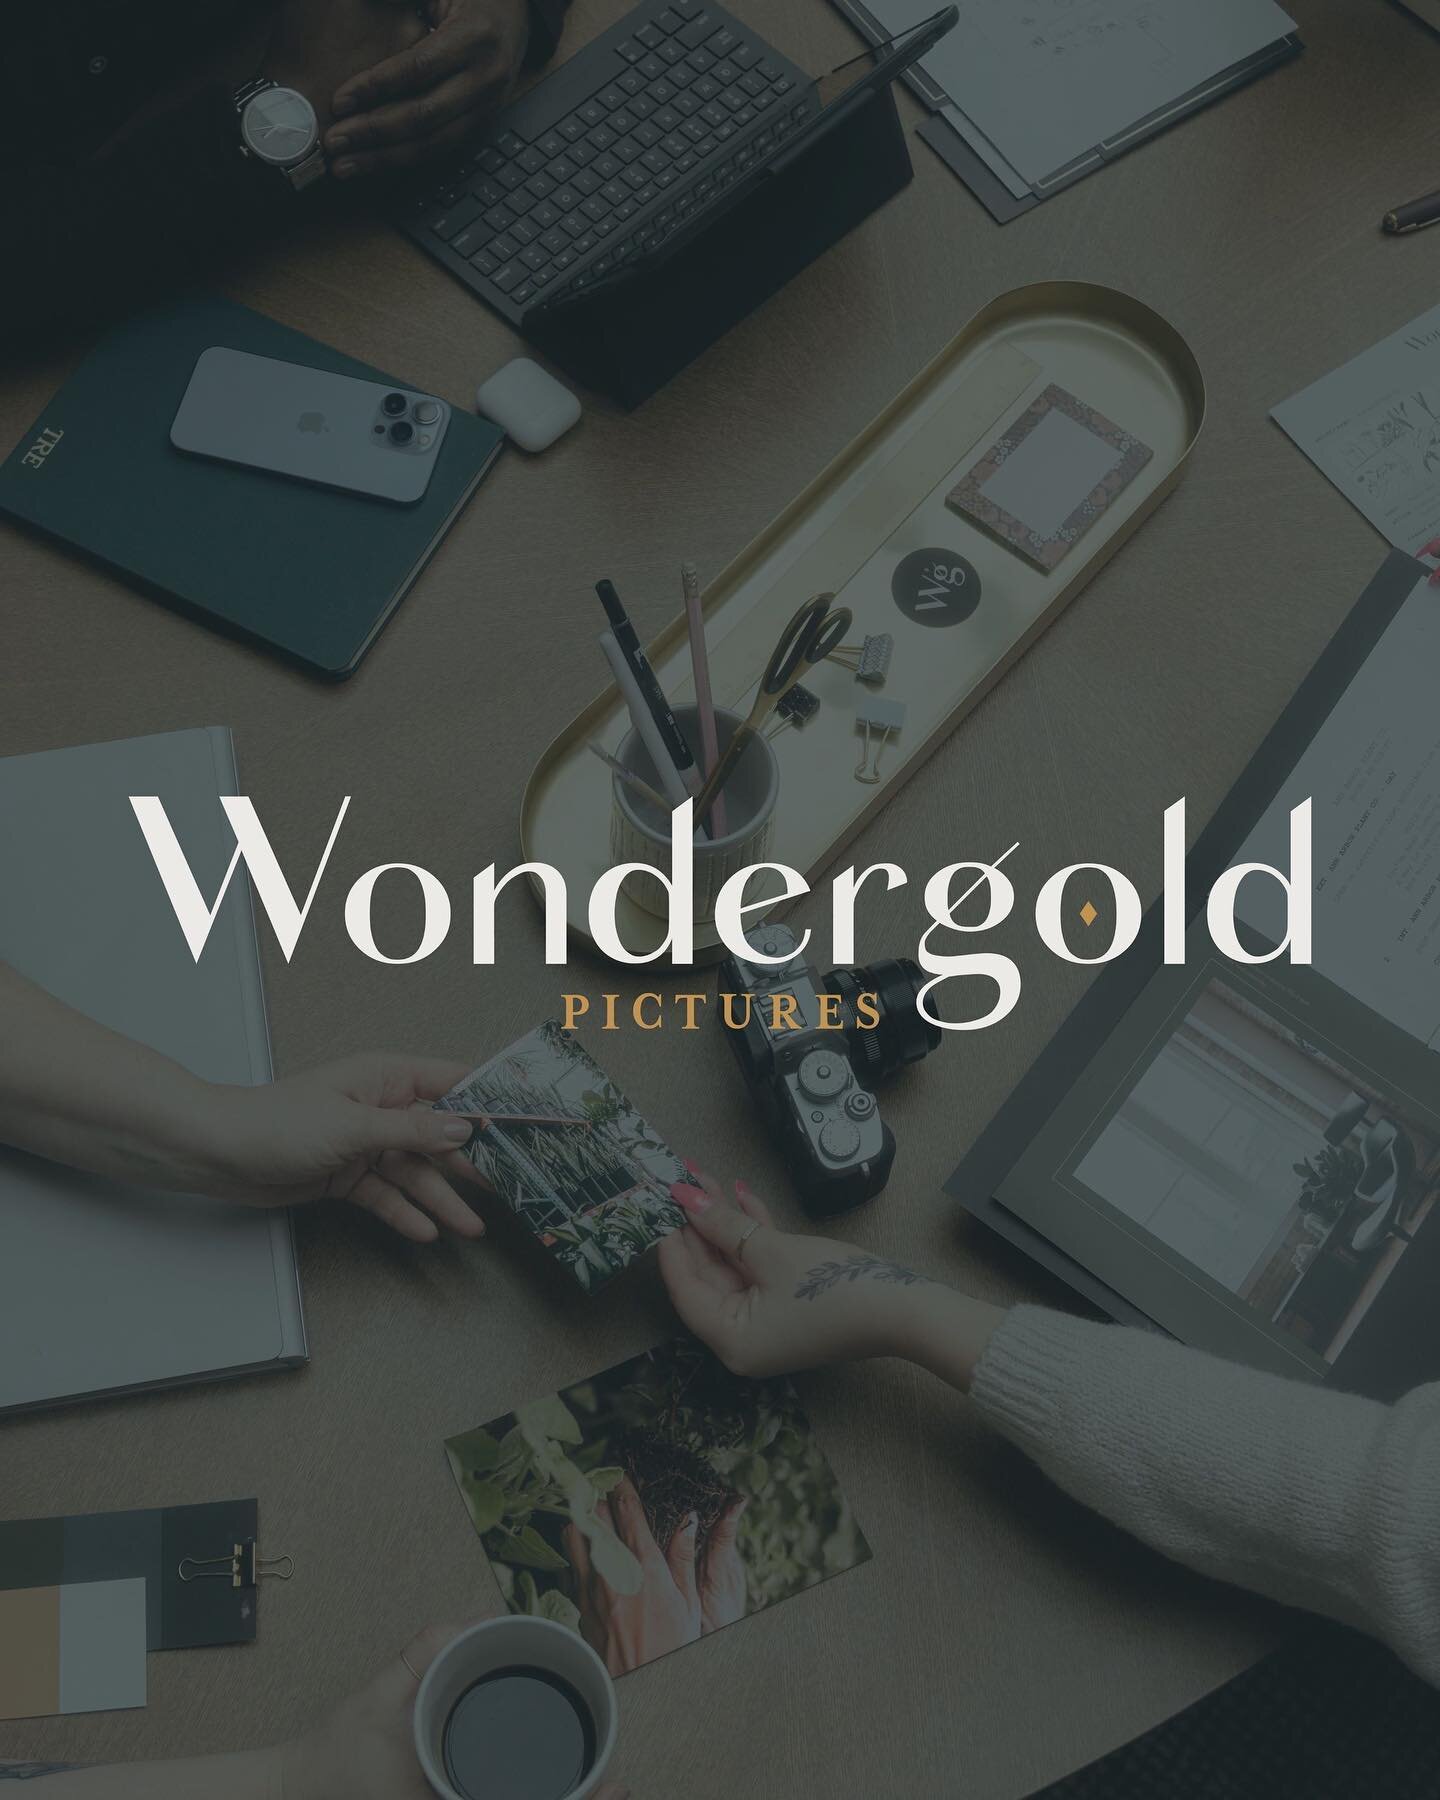 This is my labor of love. I&rsquo;ve put my whole heart in this new business for two years. Well, it&rsquo;s been culminating for almost 8 as I work independently. I&rsquo;m excited to have @wondergoldpictures out in the world officially today. Go ta